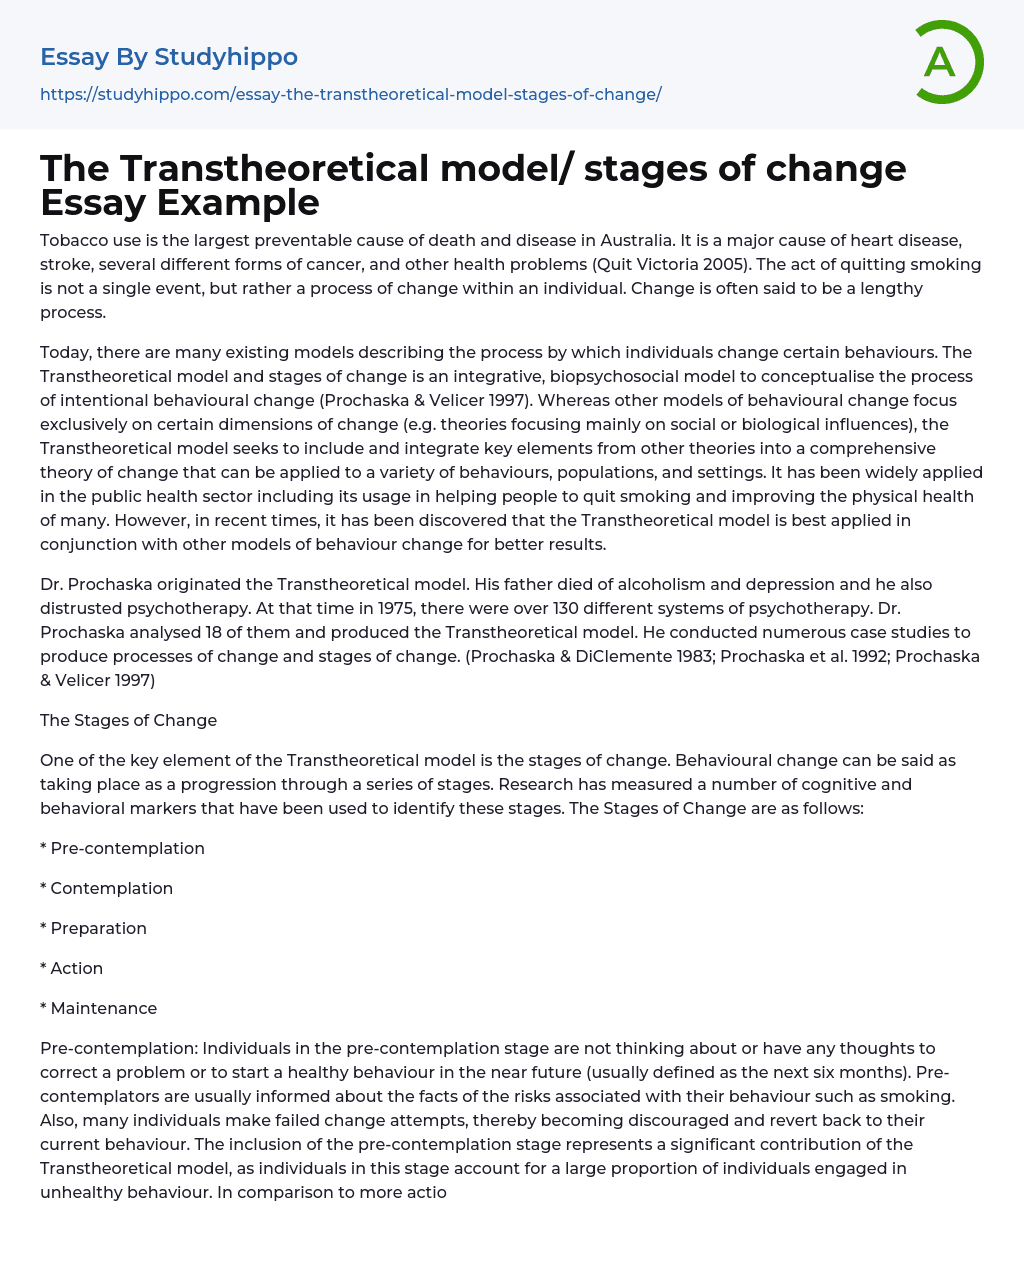 The Transtheoretical model/ stages of change Essay Example